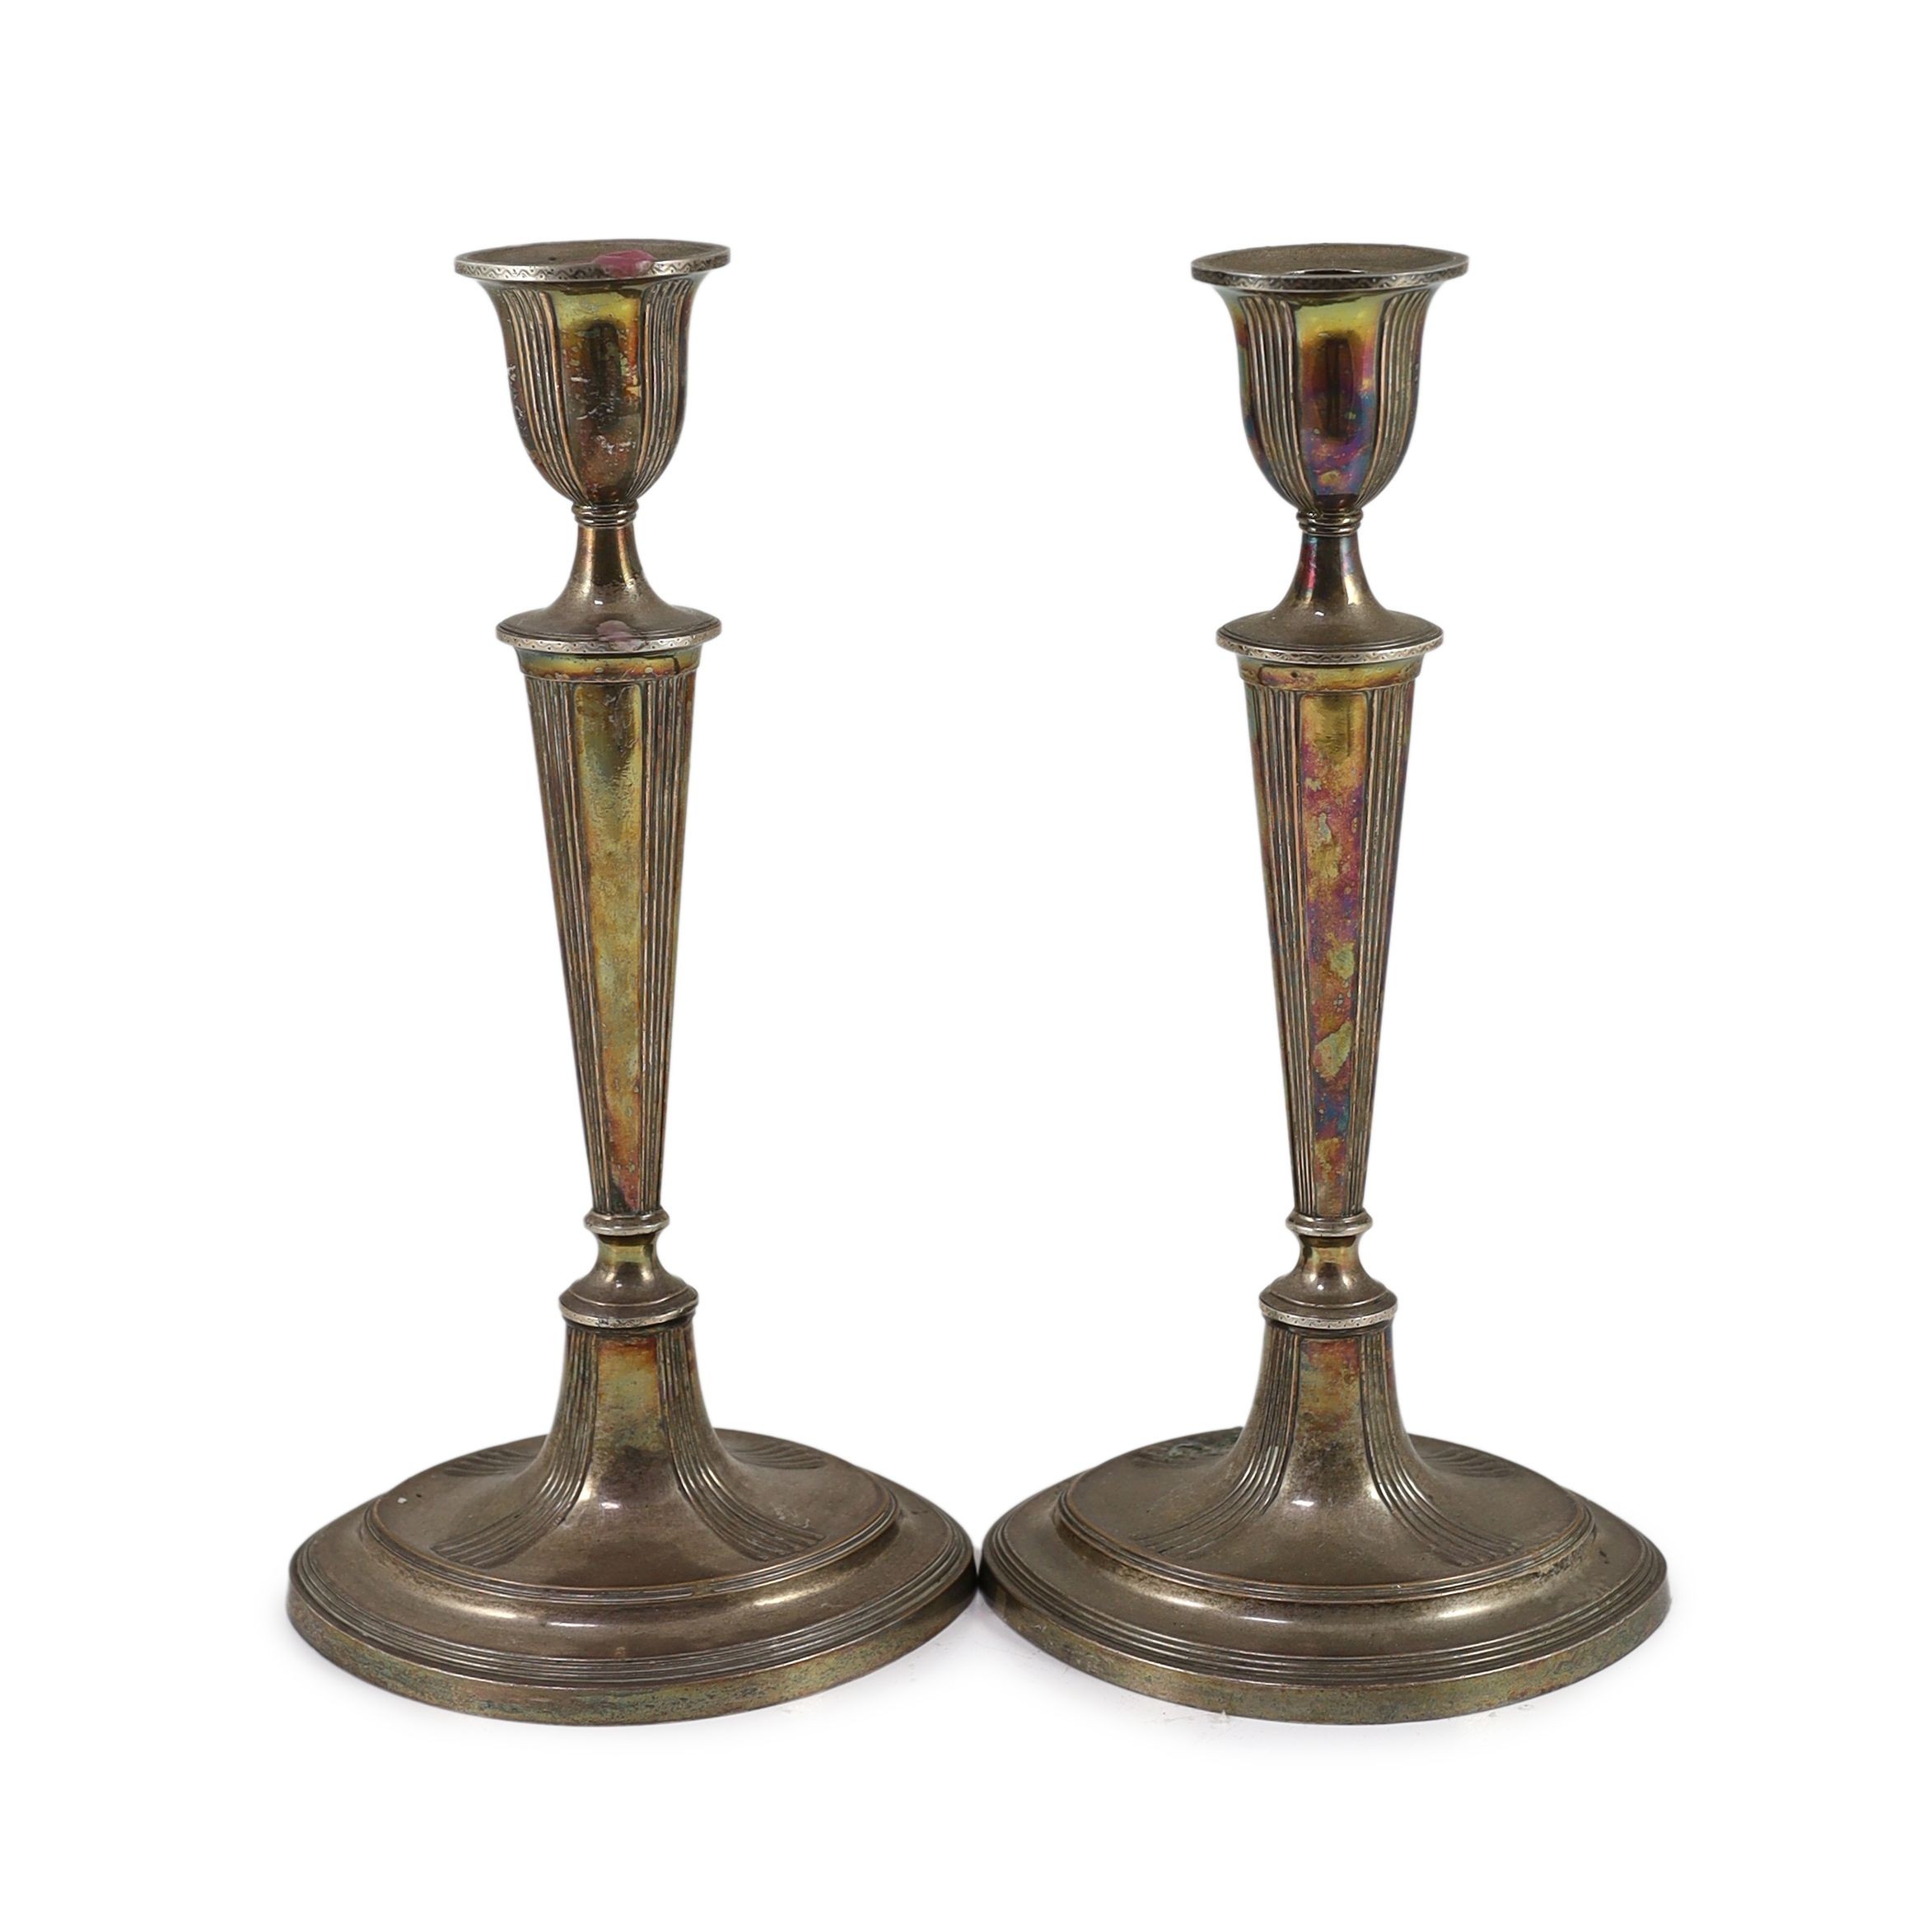 A pair of Sheffield plate candlesticks and nozzles,of neo-classical elliptical form, the stems